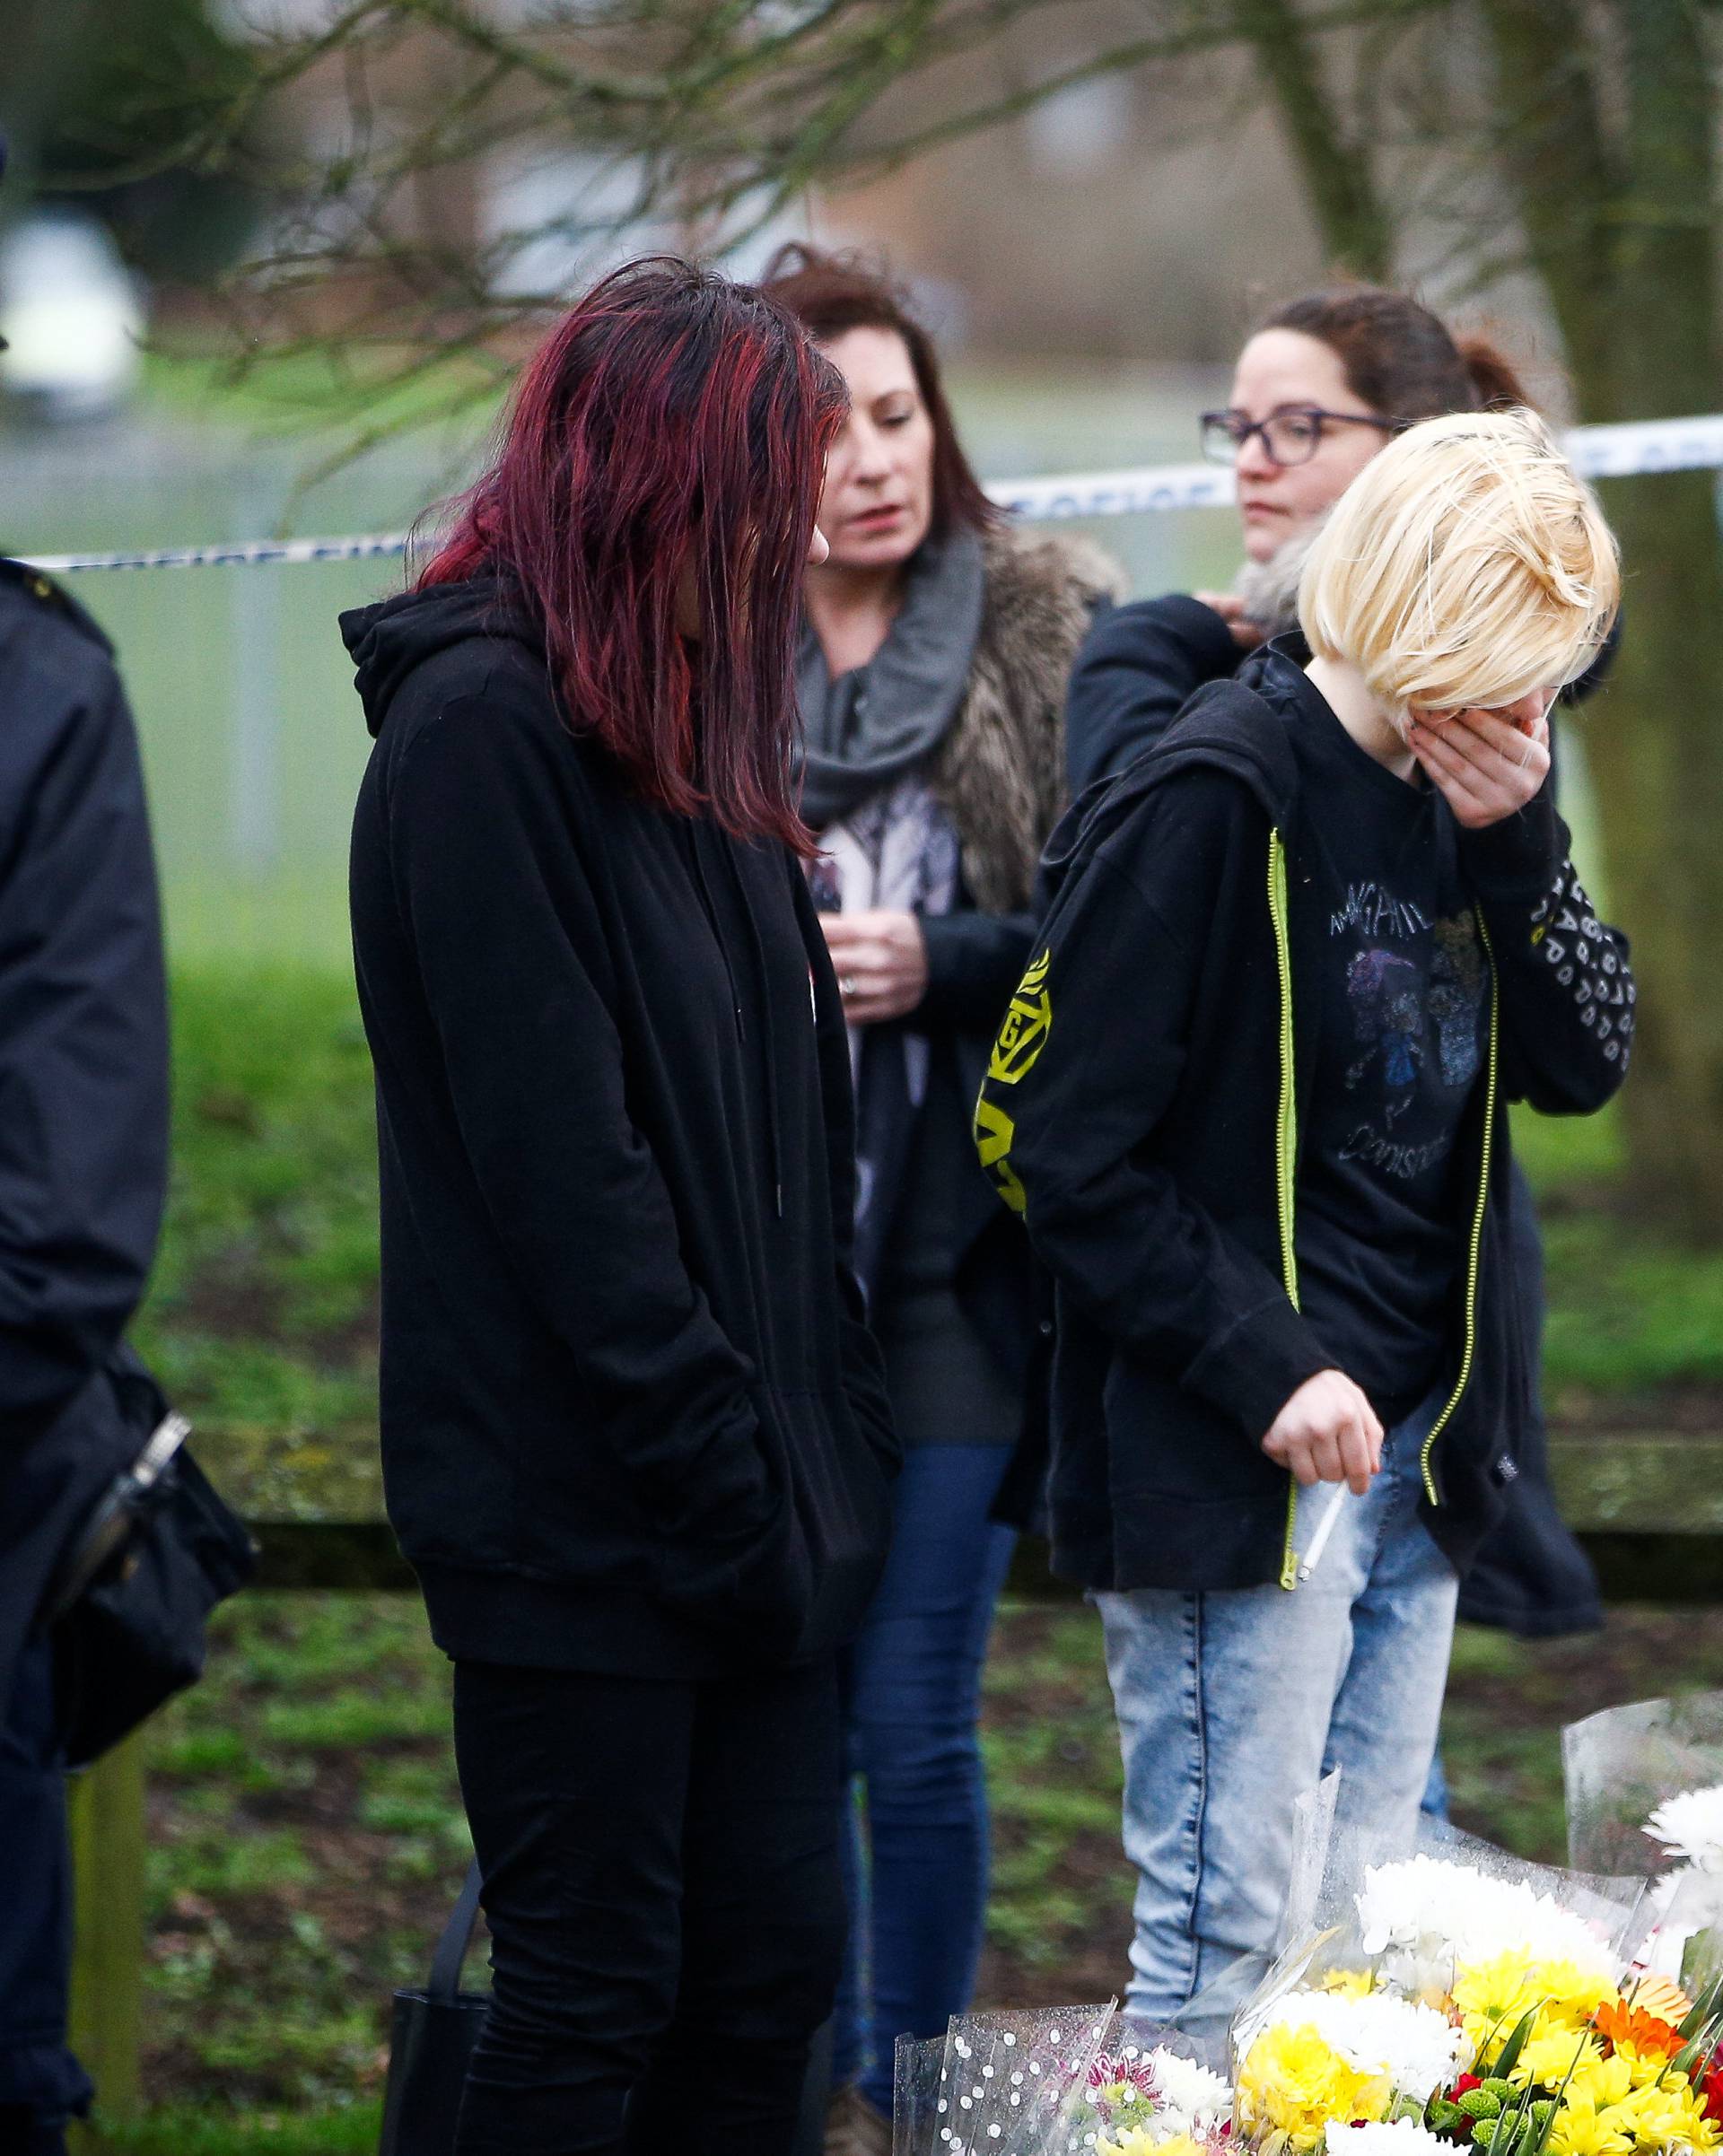 People visit  a site near to where 17-year-old Jodie Chesney was killed, at the Saint Neots Play Park in Harold Hill, east London